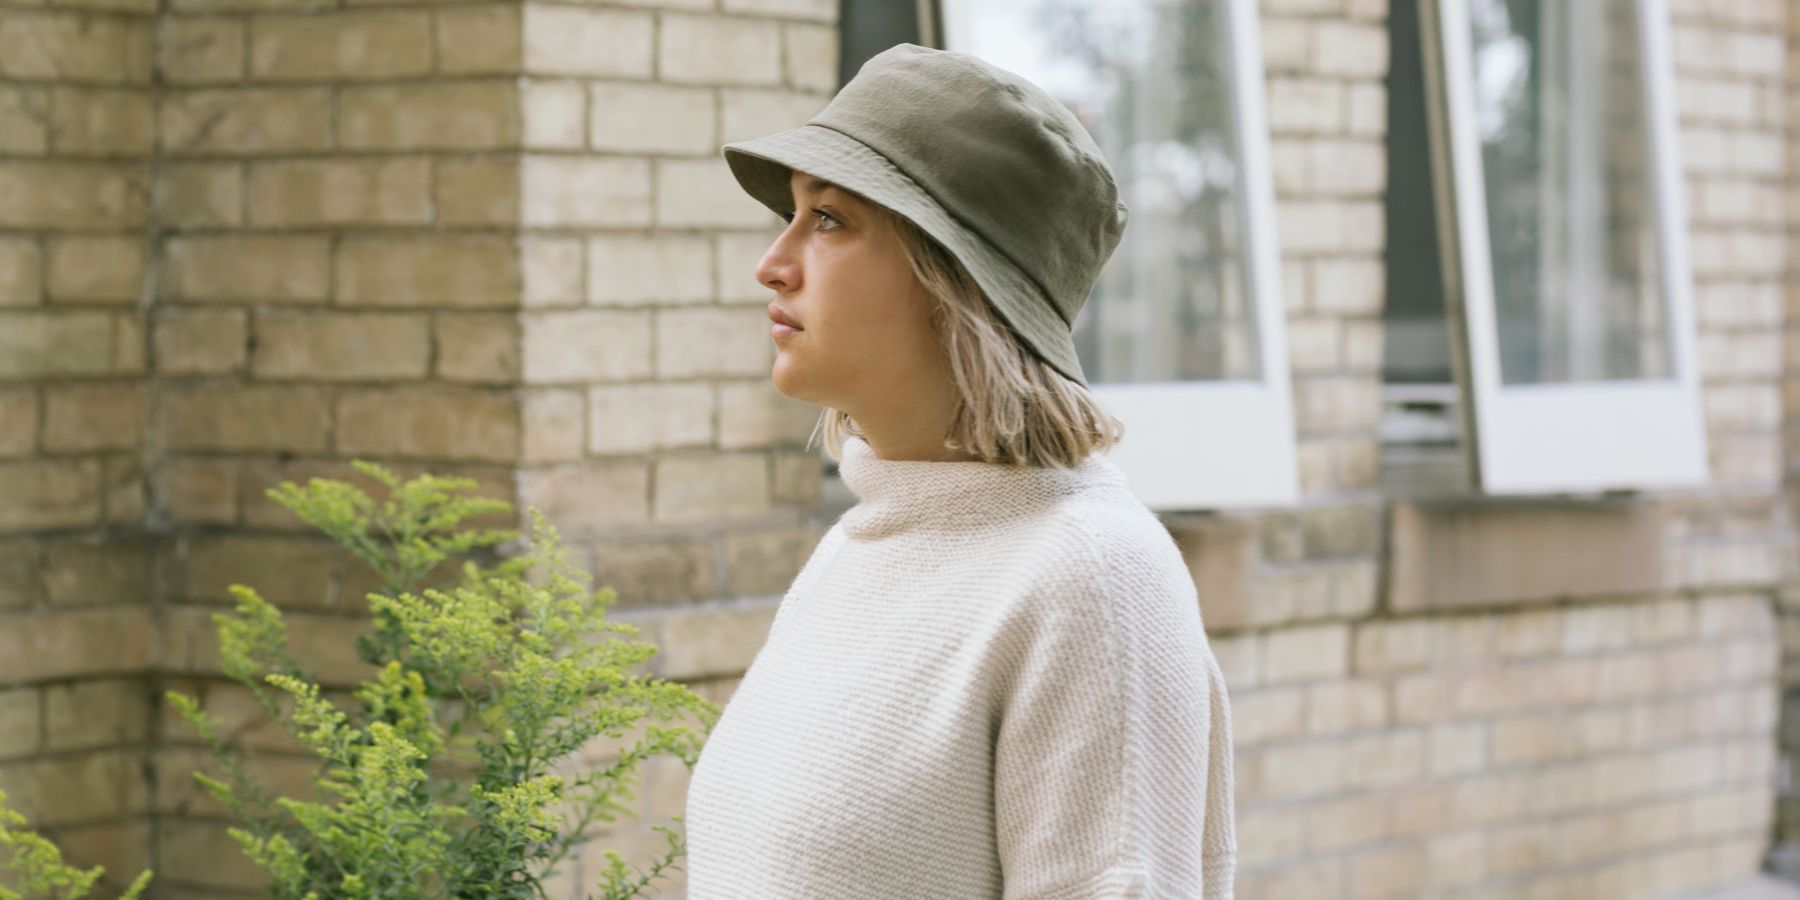 Puffin Gear Linen Bucket Hats for all Seasons-Made in Canada